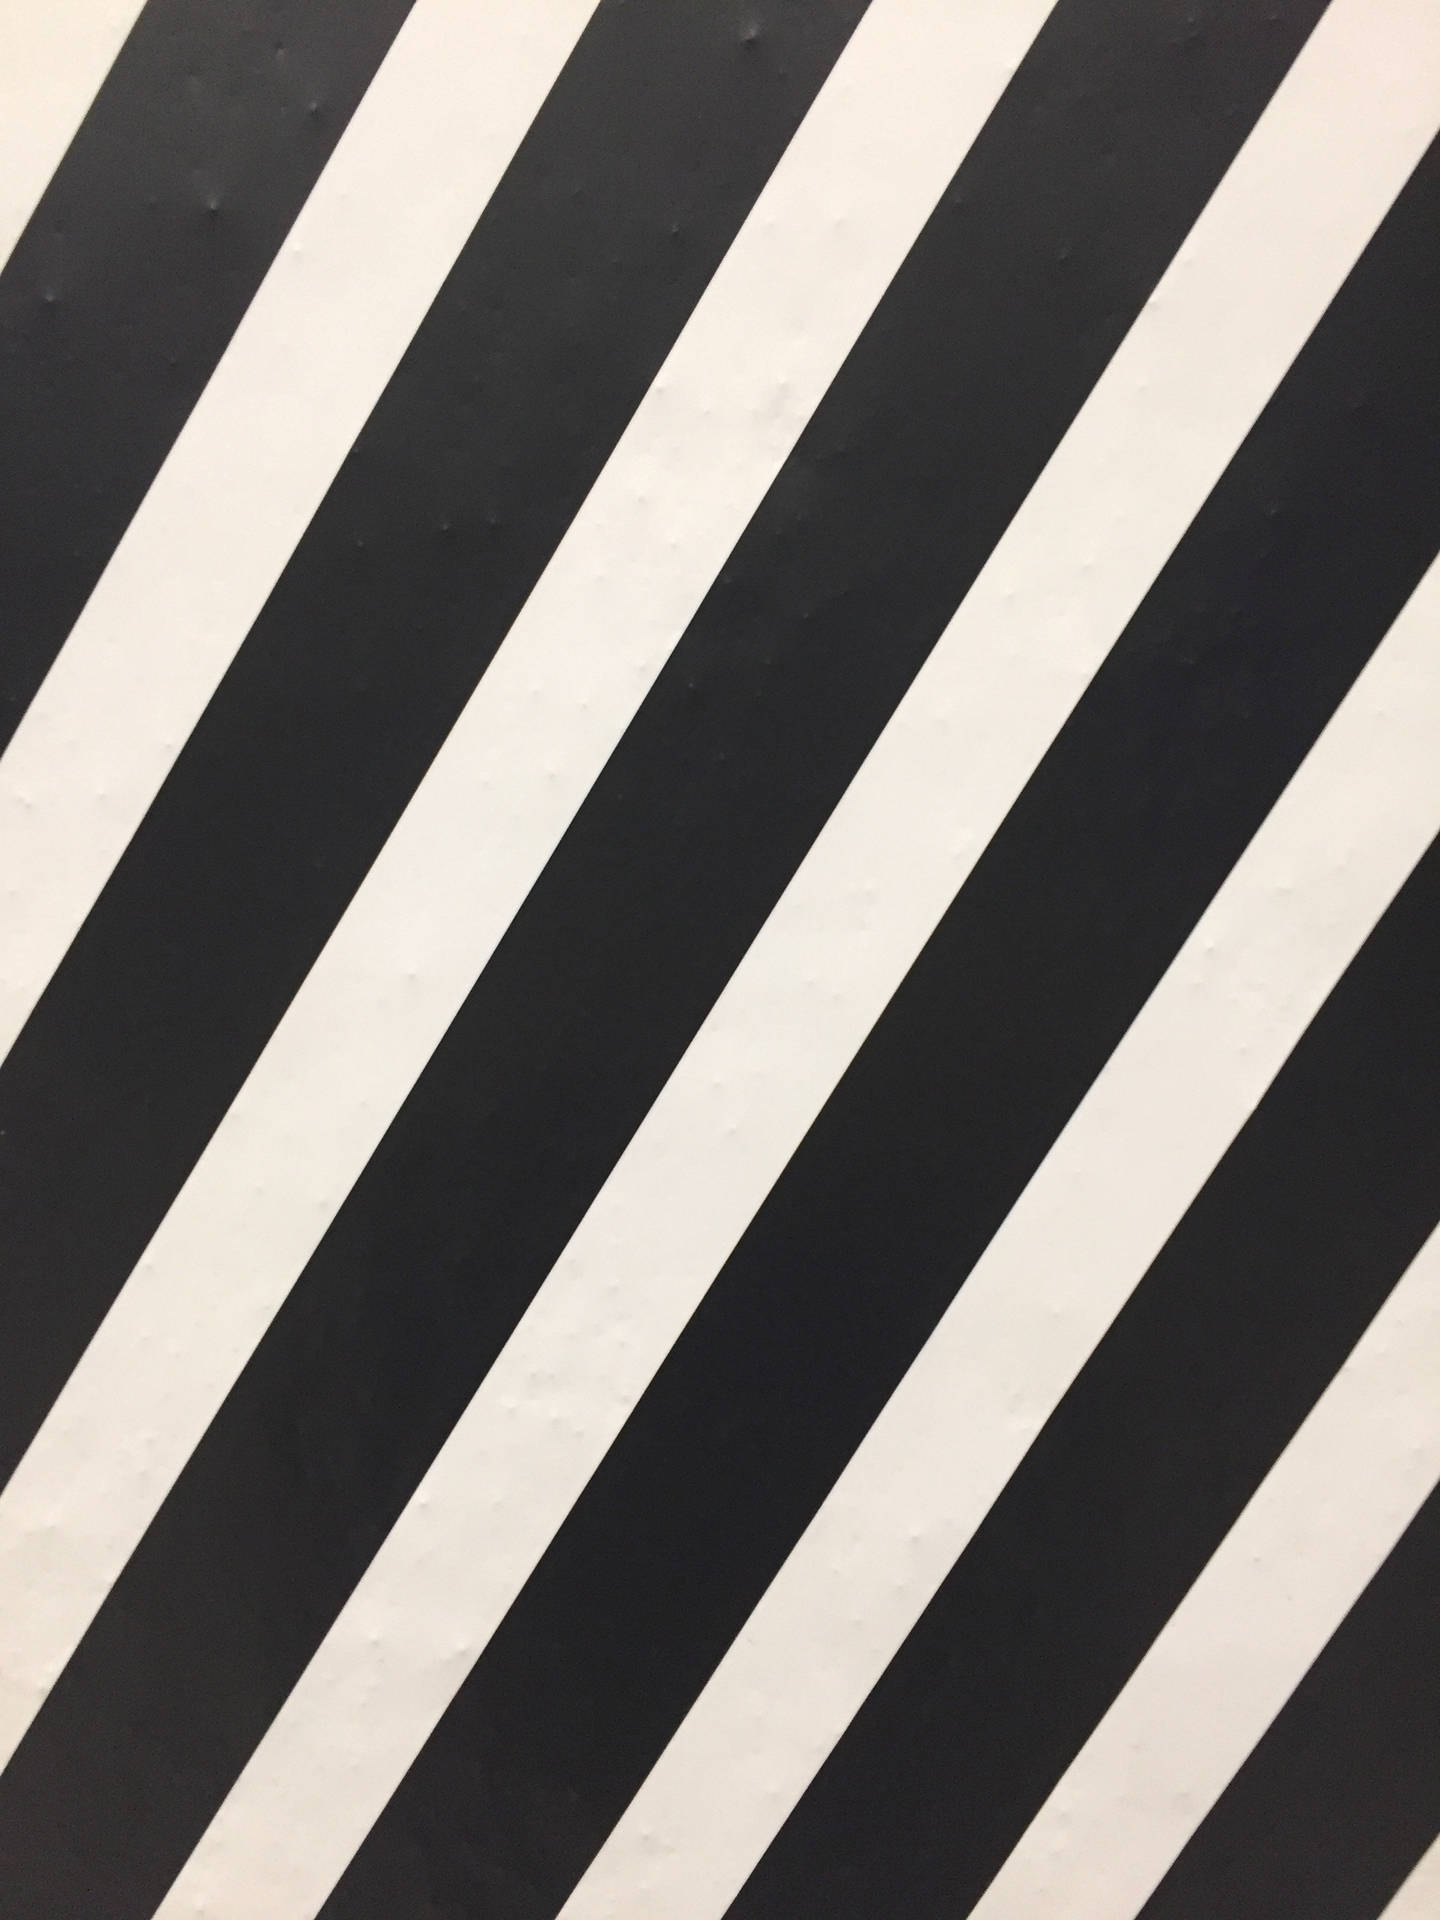 2448X3264 Striped Wallpaper and Background